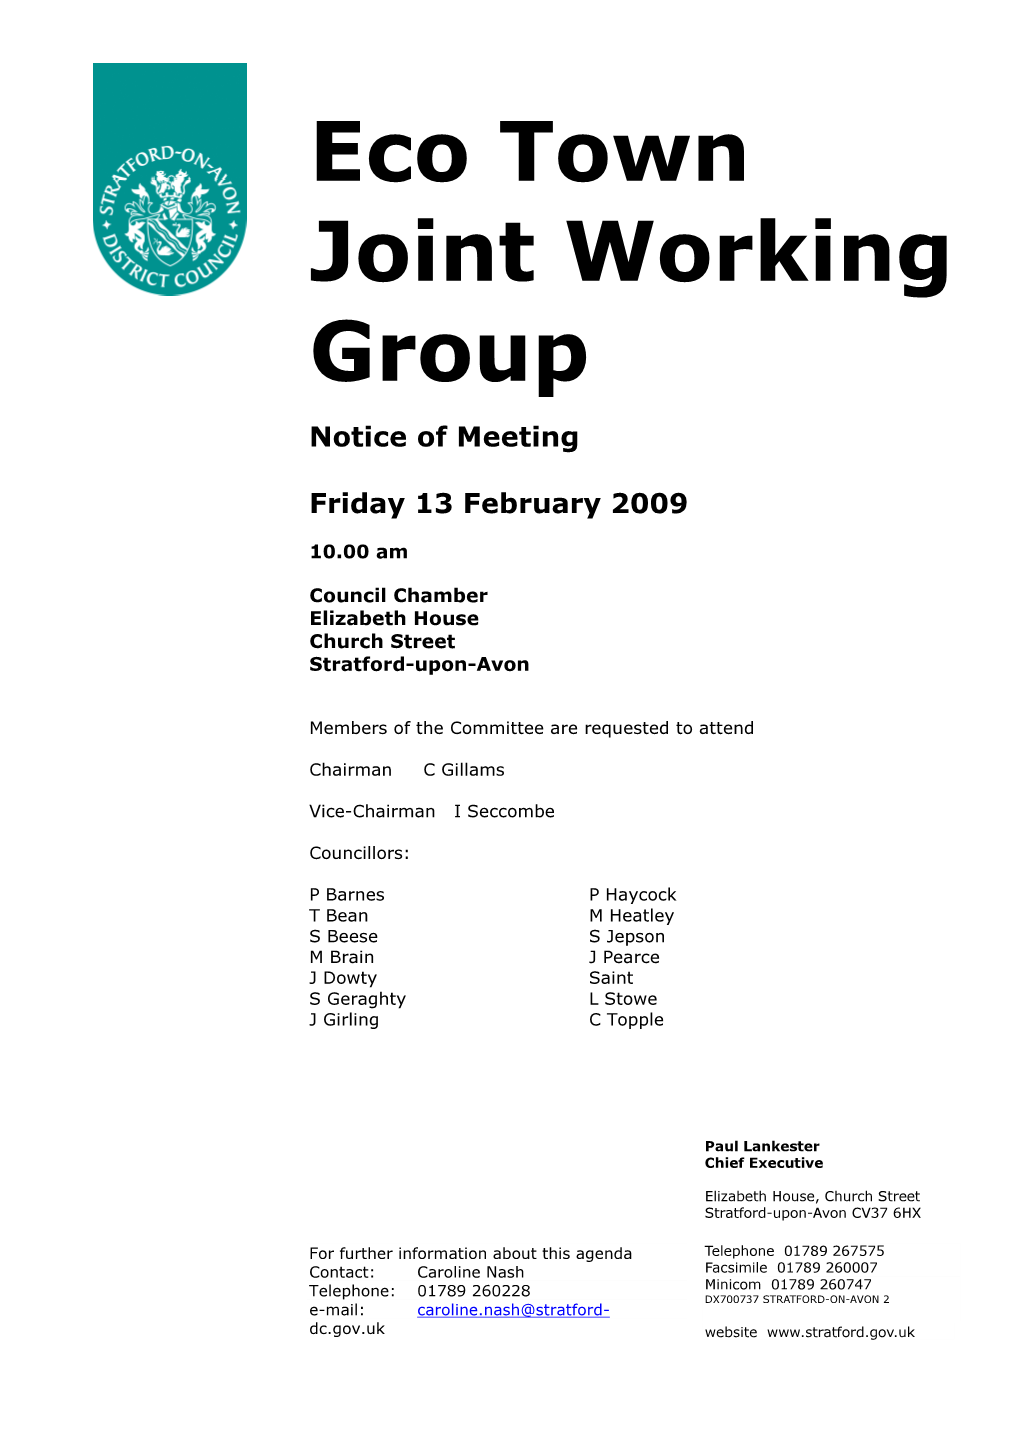 Eco Town Joint Working Group